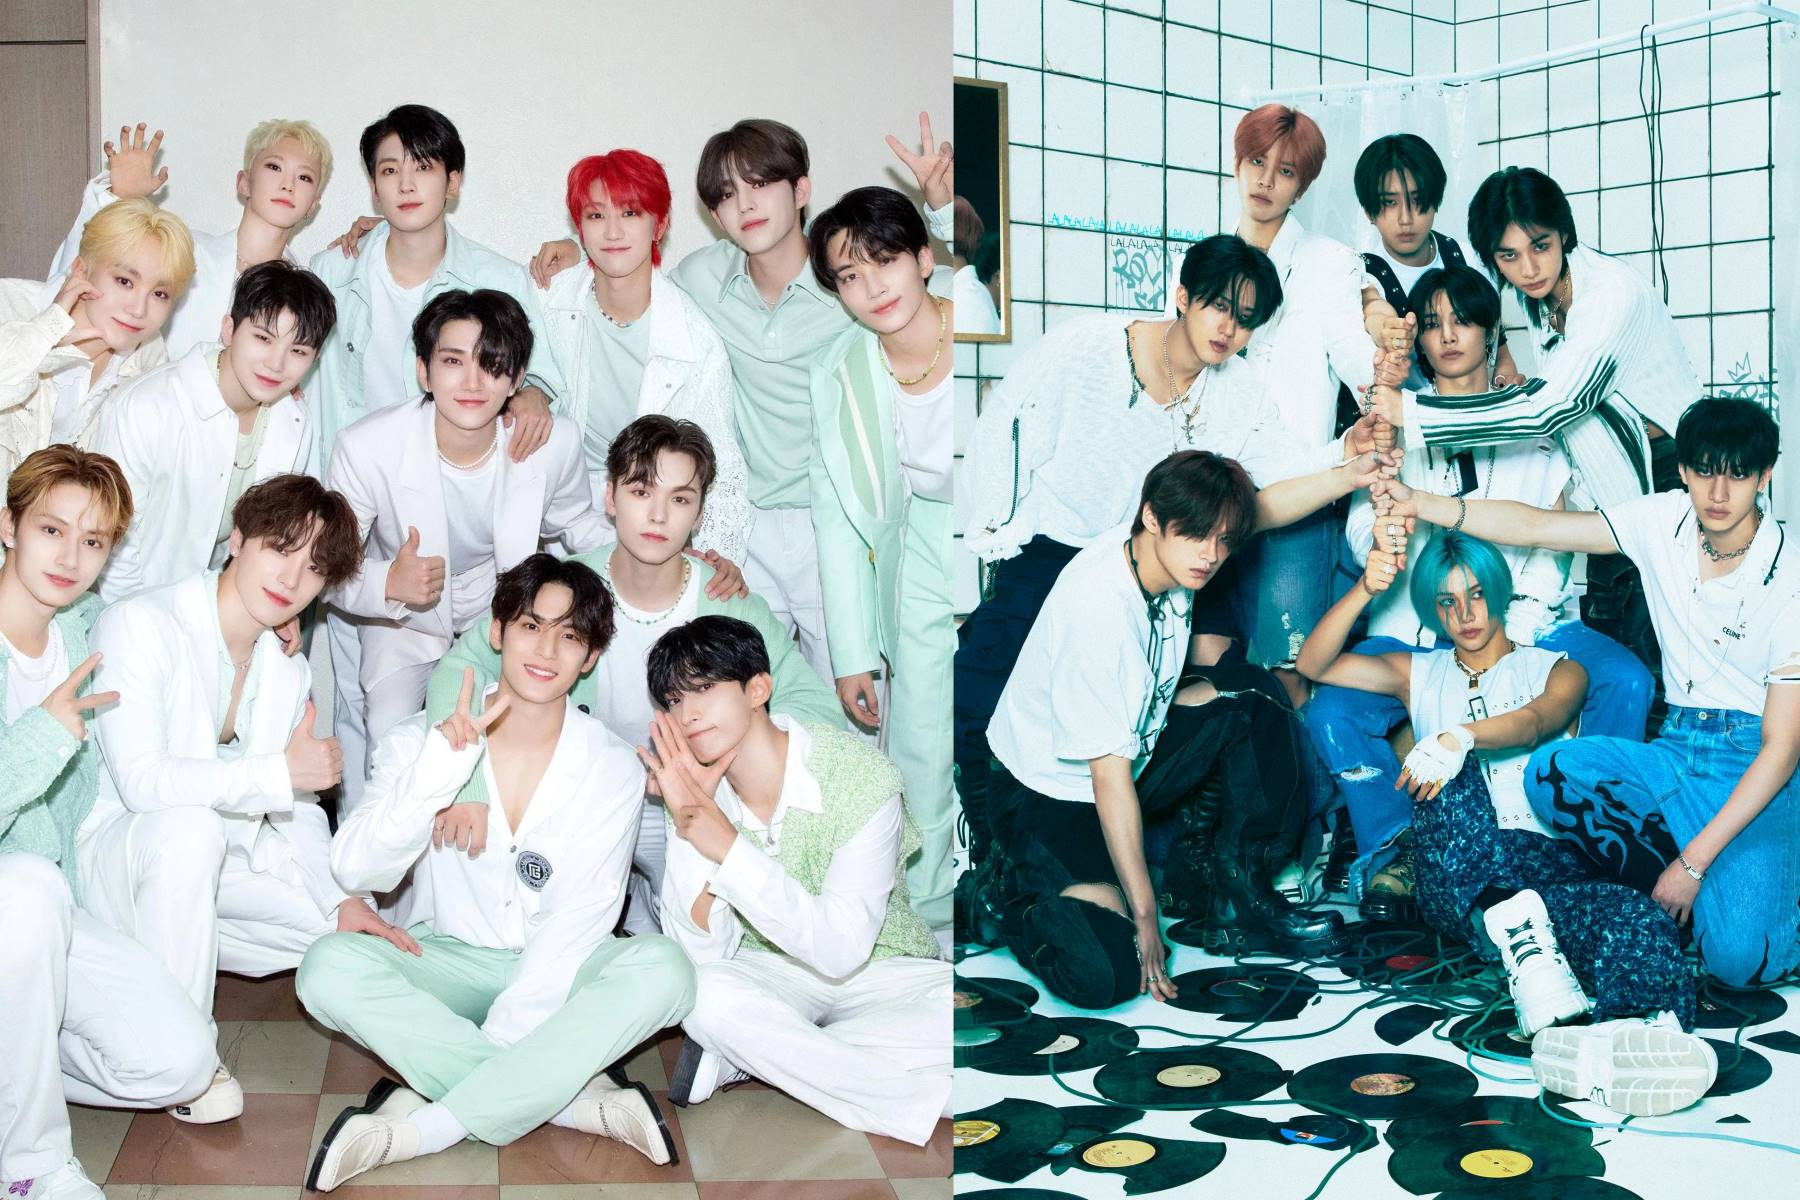 Zodiac Signs Of Stray Kids And Seventeen Members Revealed!